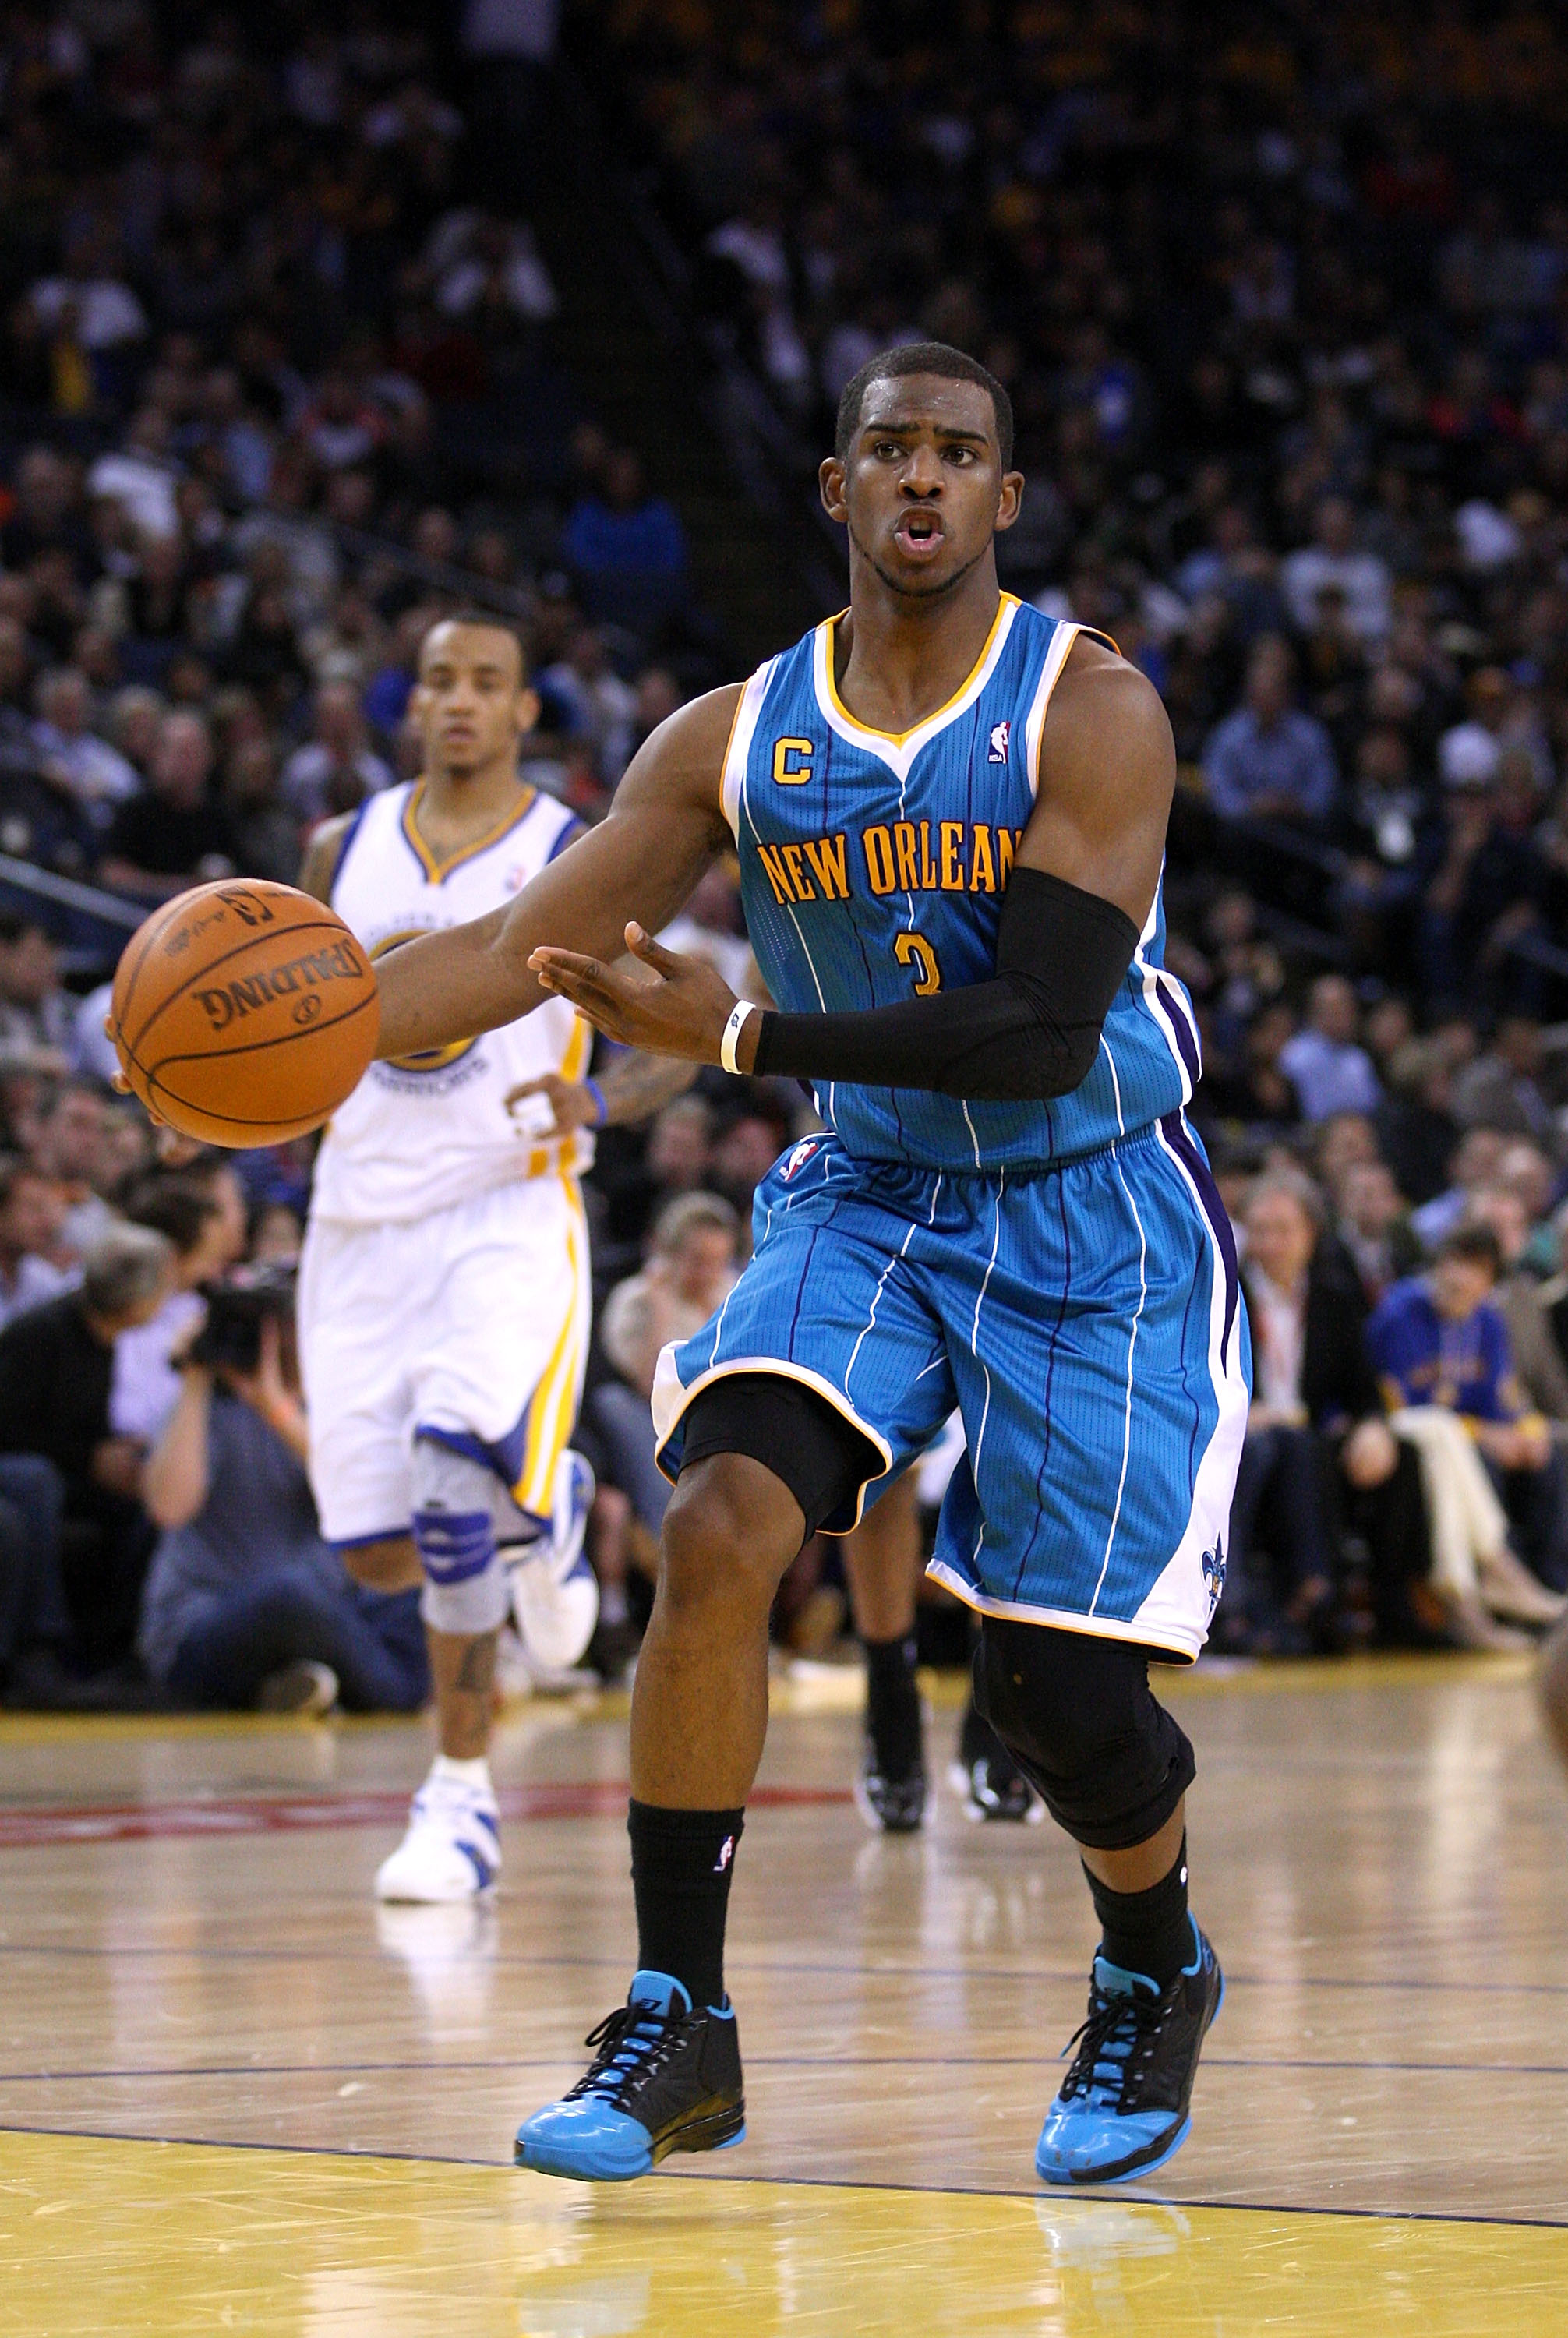 OAKLAND, CA - JANUARY 26:  Chris Paul #3 of the New Orleans Hornets passes the ball during their game against the Golden State Warriors at Oracle Arena on January 26, 2011 in Oakland, California.  NOTE TO USER: User expressly acknowledges and agrees that,